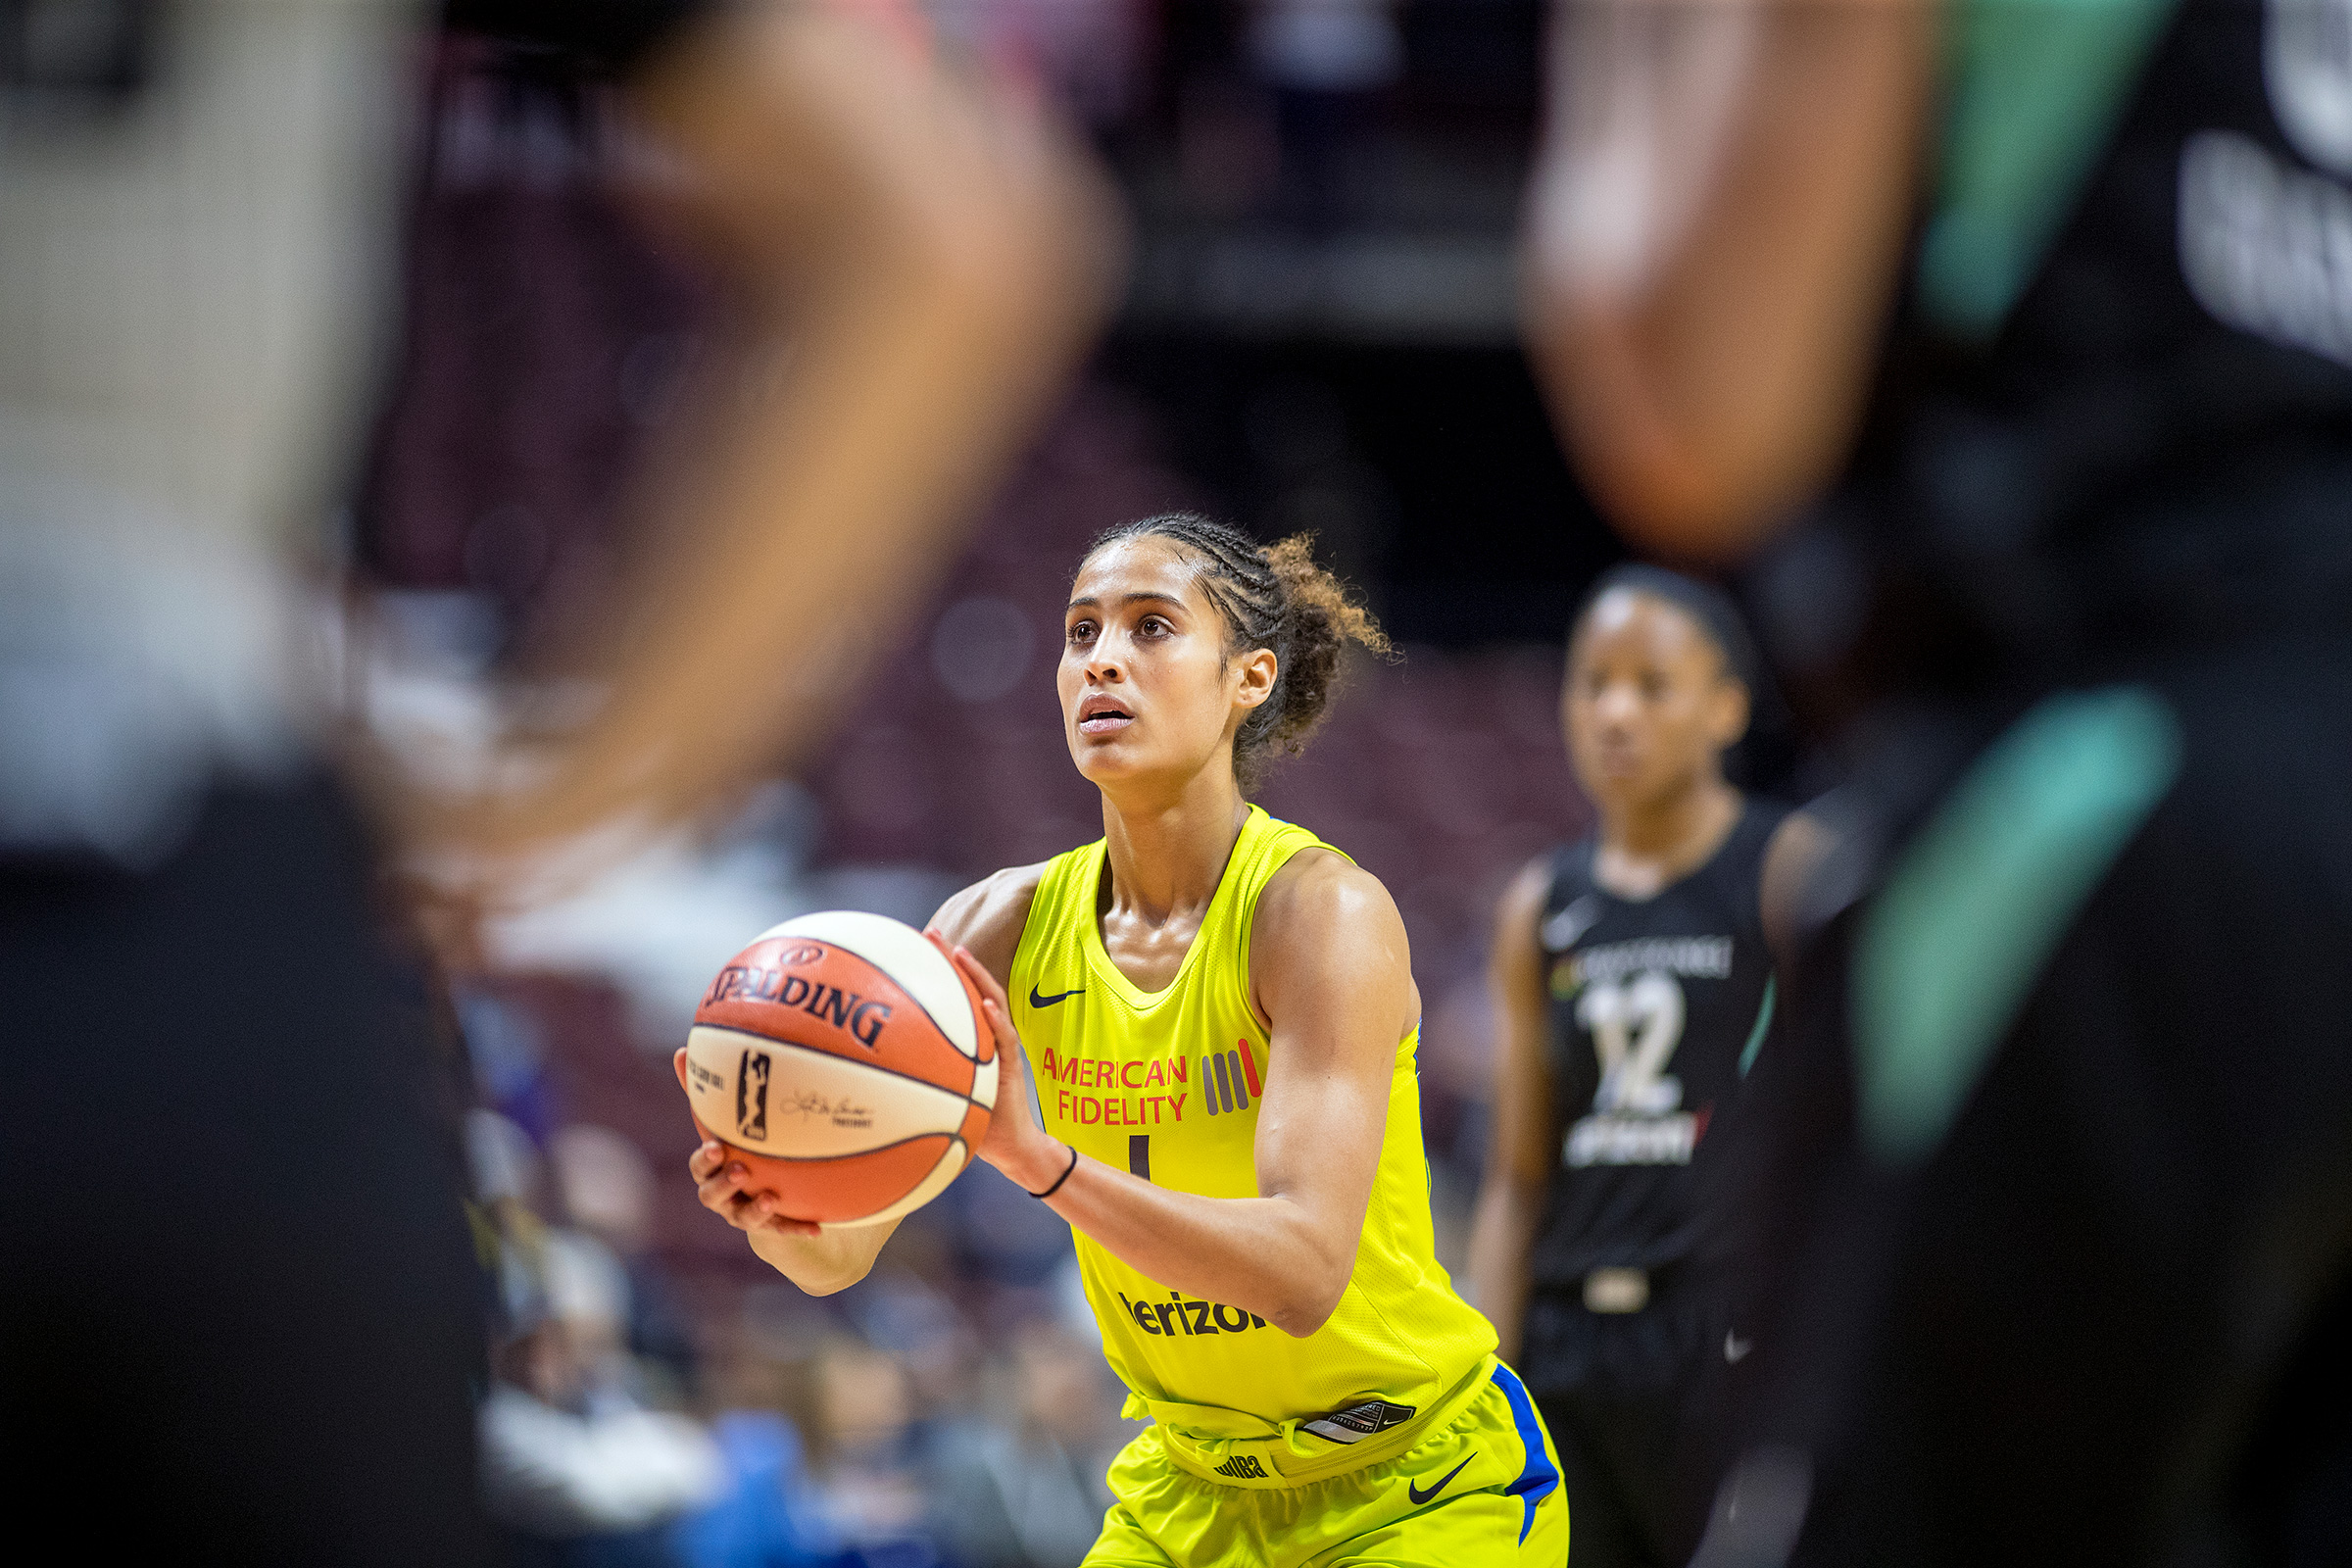 Diggins-Smith during a WNBA preseason game in 2018; she later said she played the whole season pregnant